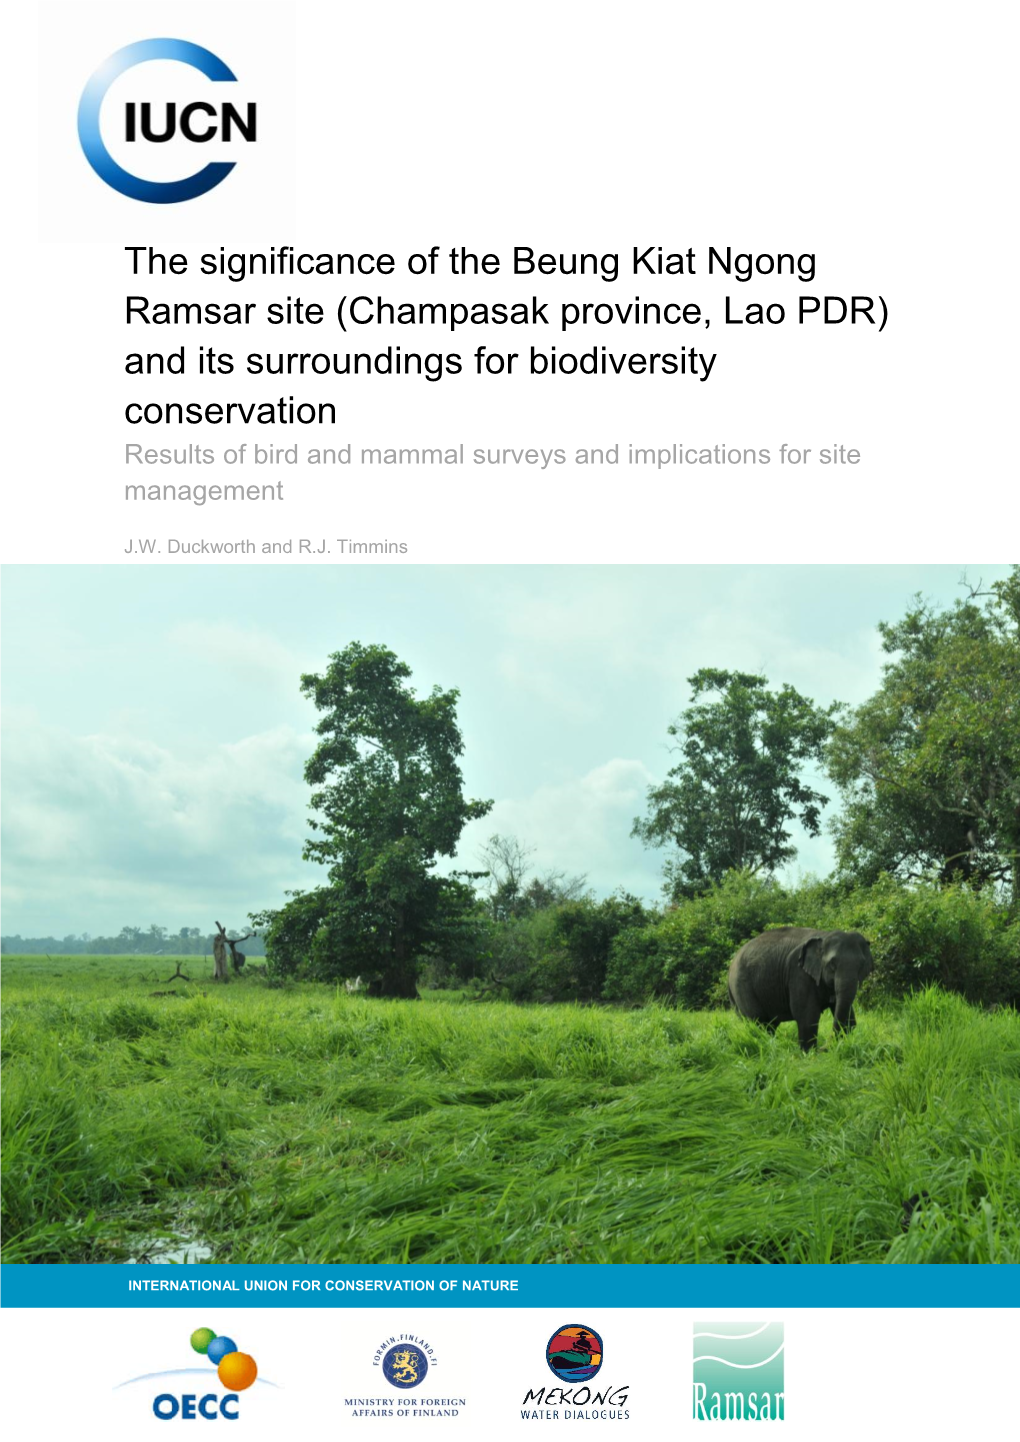 The Significance of the Beung Kiat Ngong Ramsar Site